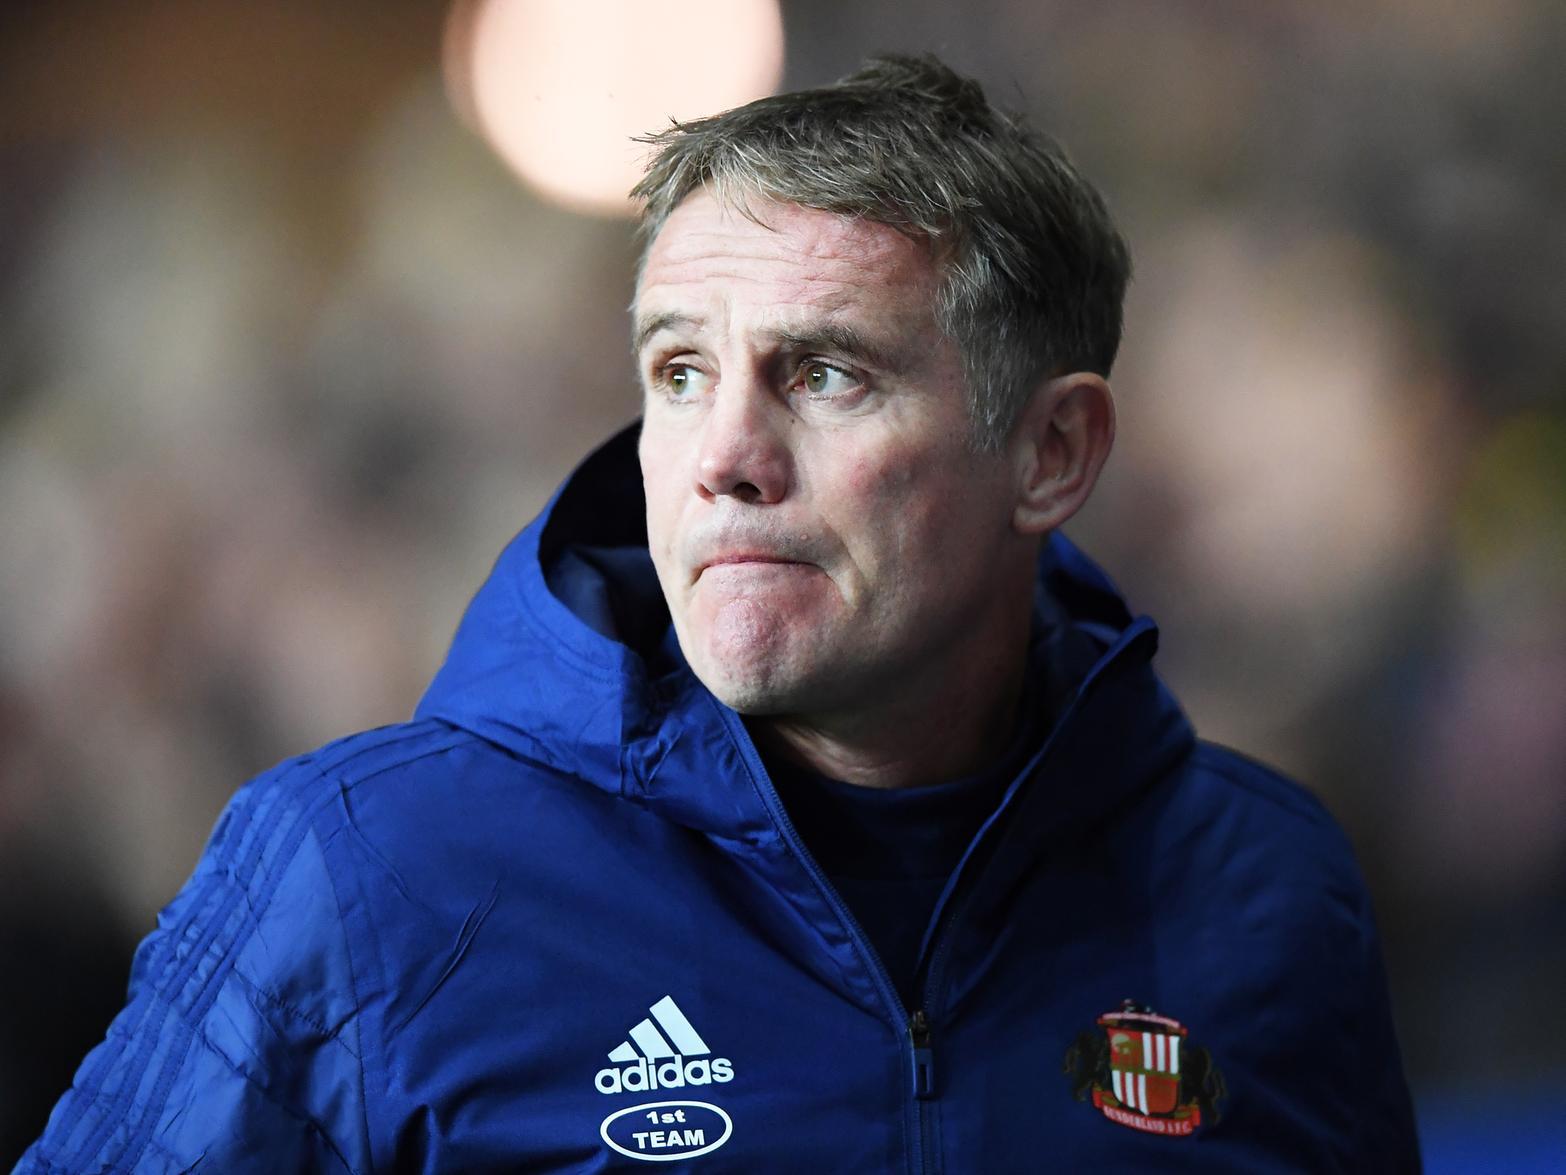 Sunderland didnt play this weekend, but results mean the Black Cats slipped to 13th - the lowest position the North East club have occupied in their entire history.